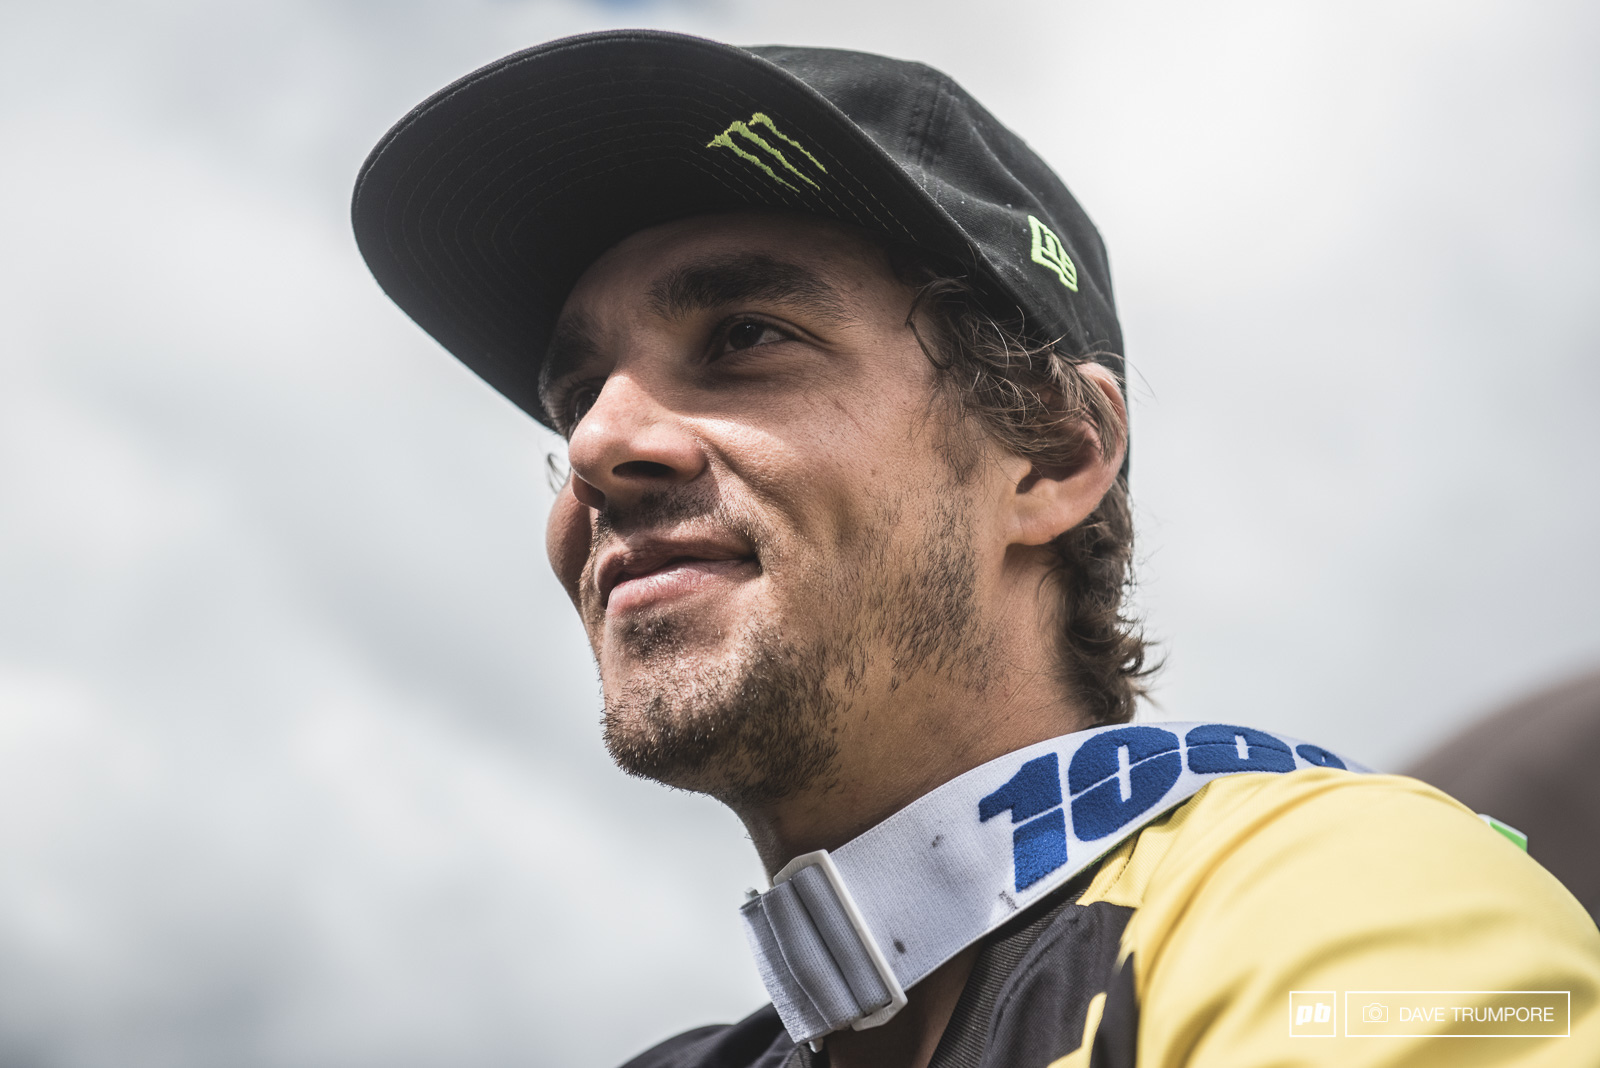 Quitely confident all weekend, Sam Hill delivered when it counted in Valberg.  It will certainly be exciting to have this guy contesting the entire series next year.